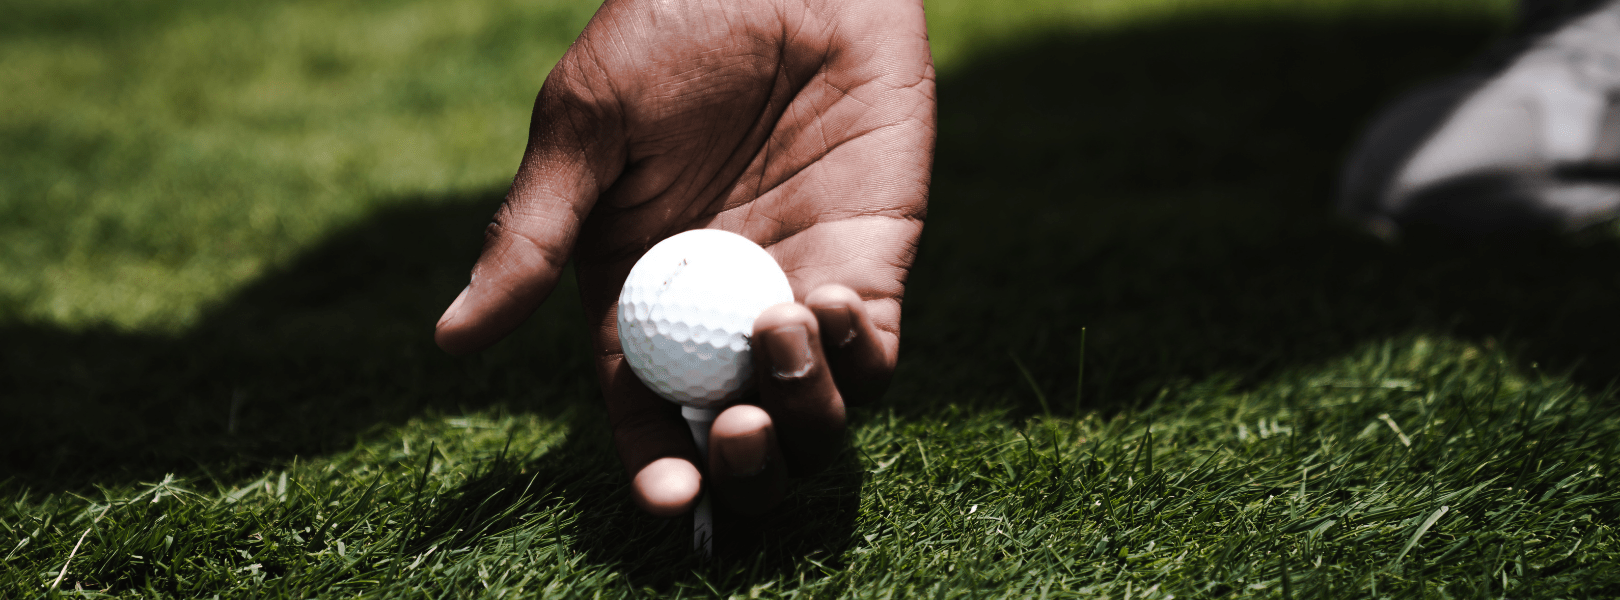 Things to Do - Cape Coral - Golf - hero images-min